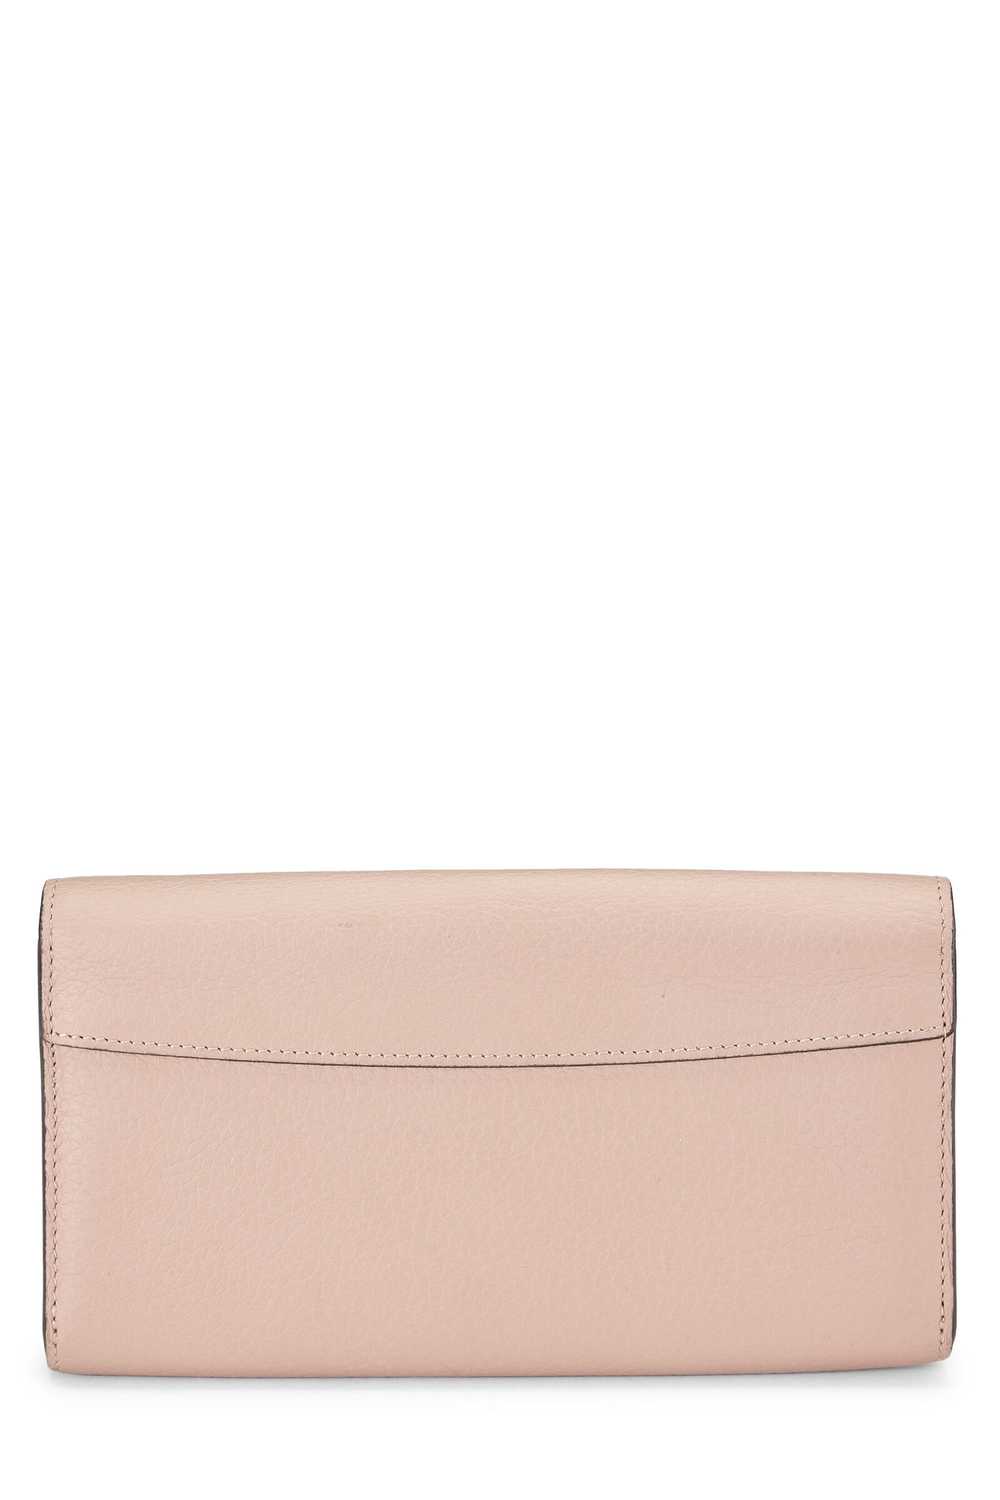 Pink Taurillon Leather Capucines Wallet - image 3